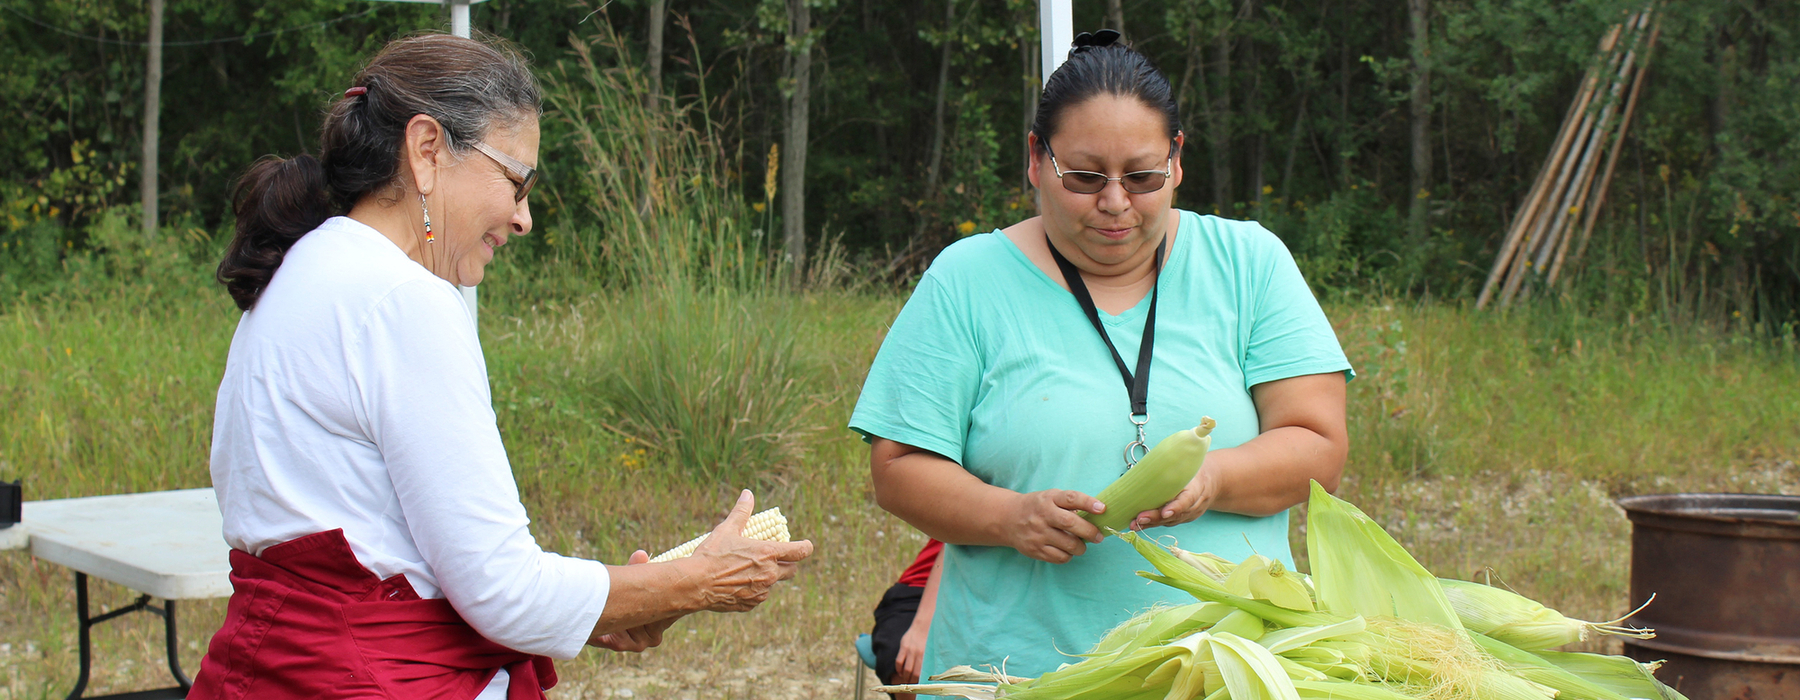 Two women shucking Indian corn. Left - a woman wearing a white shirt with a red shirt tied around her waist, with brown hair pulled back, and glasses, smiling. Right: A woman in a blue-green shirt, tied back brown hair, and glasses, frowning at the ear of corn in her hands.